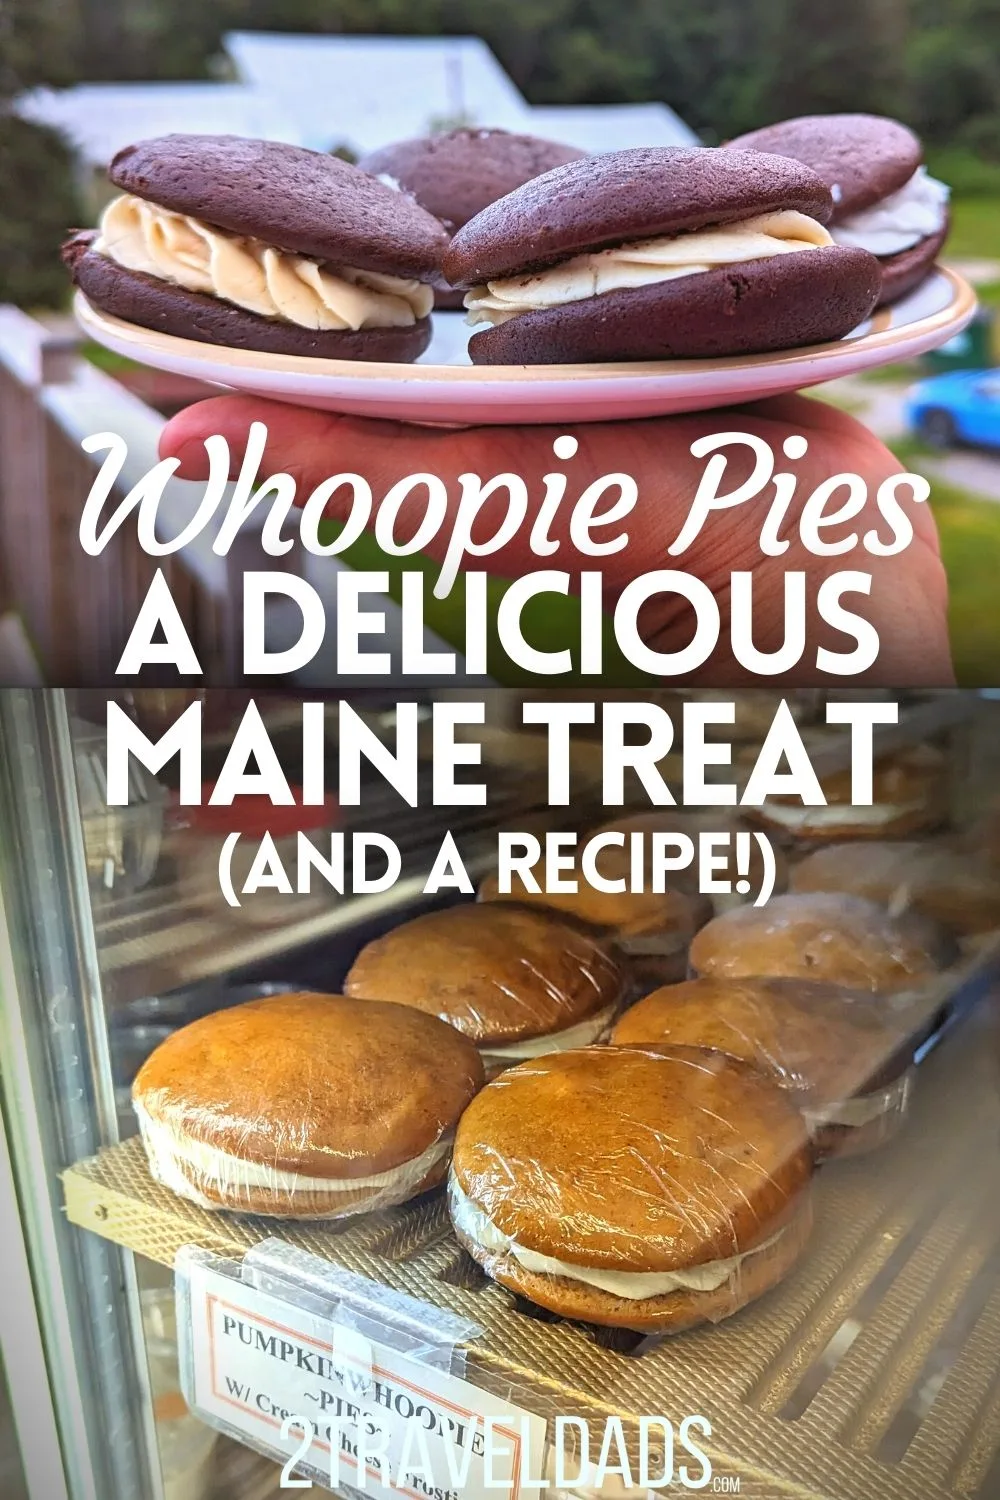 Whoopie pies are a quintessential Maine treat that you'll find all around the state. See what just a whoopie pie is, our favorite places in Maine to get them, and our recipe to make whoopie pies at home!